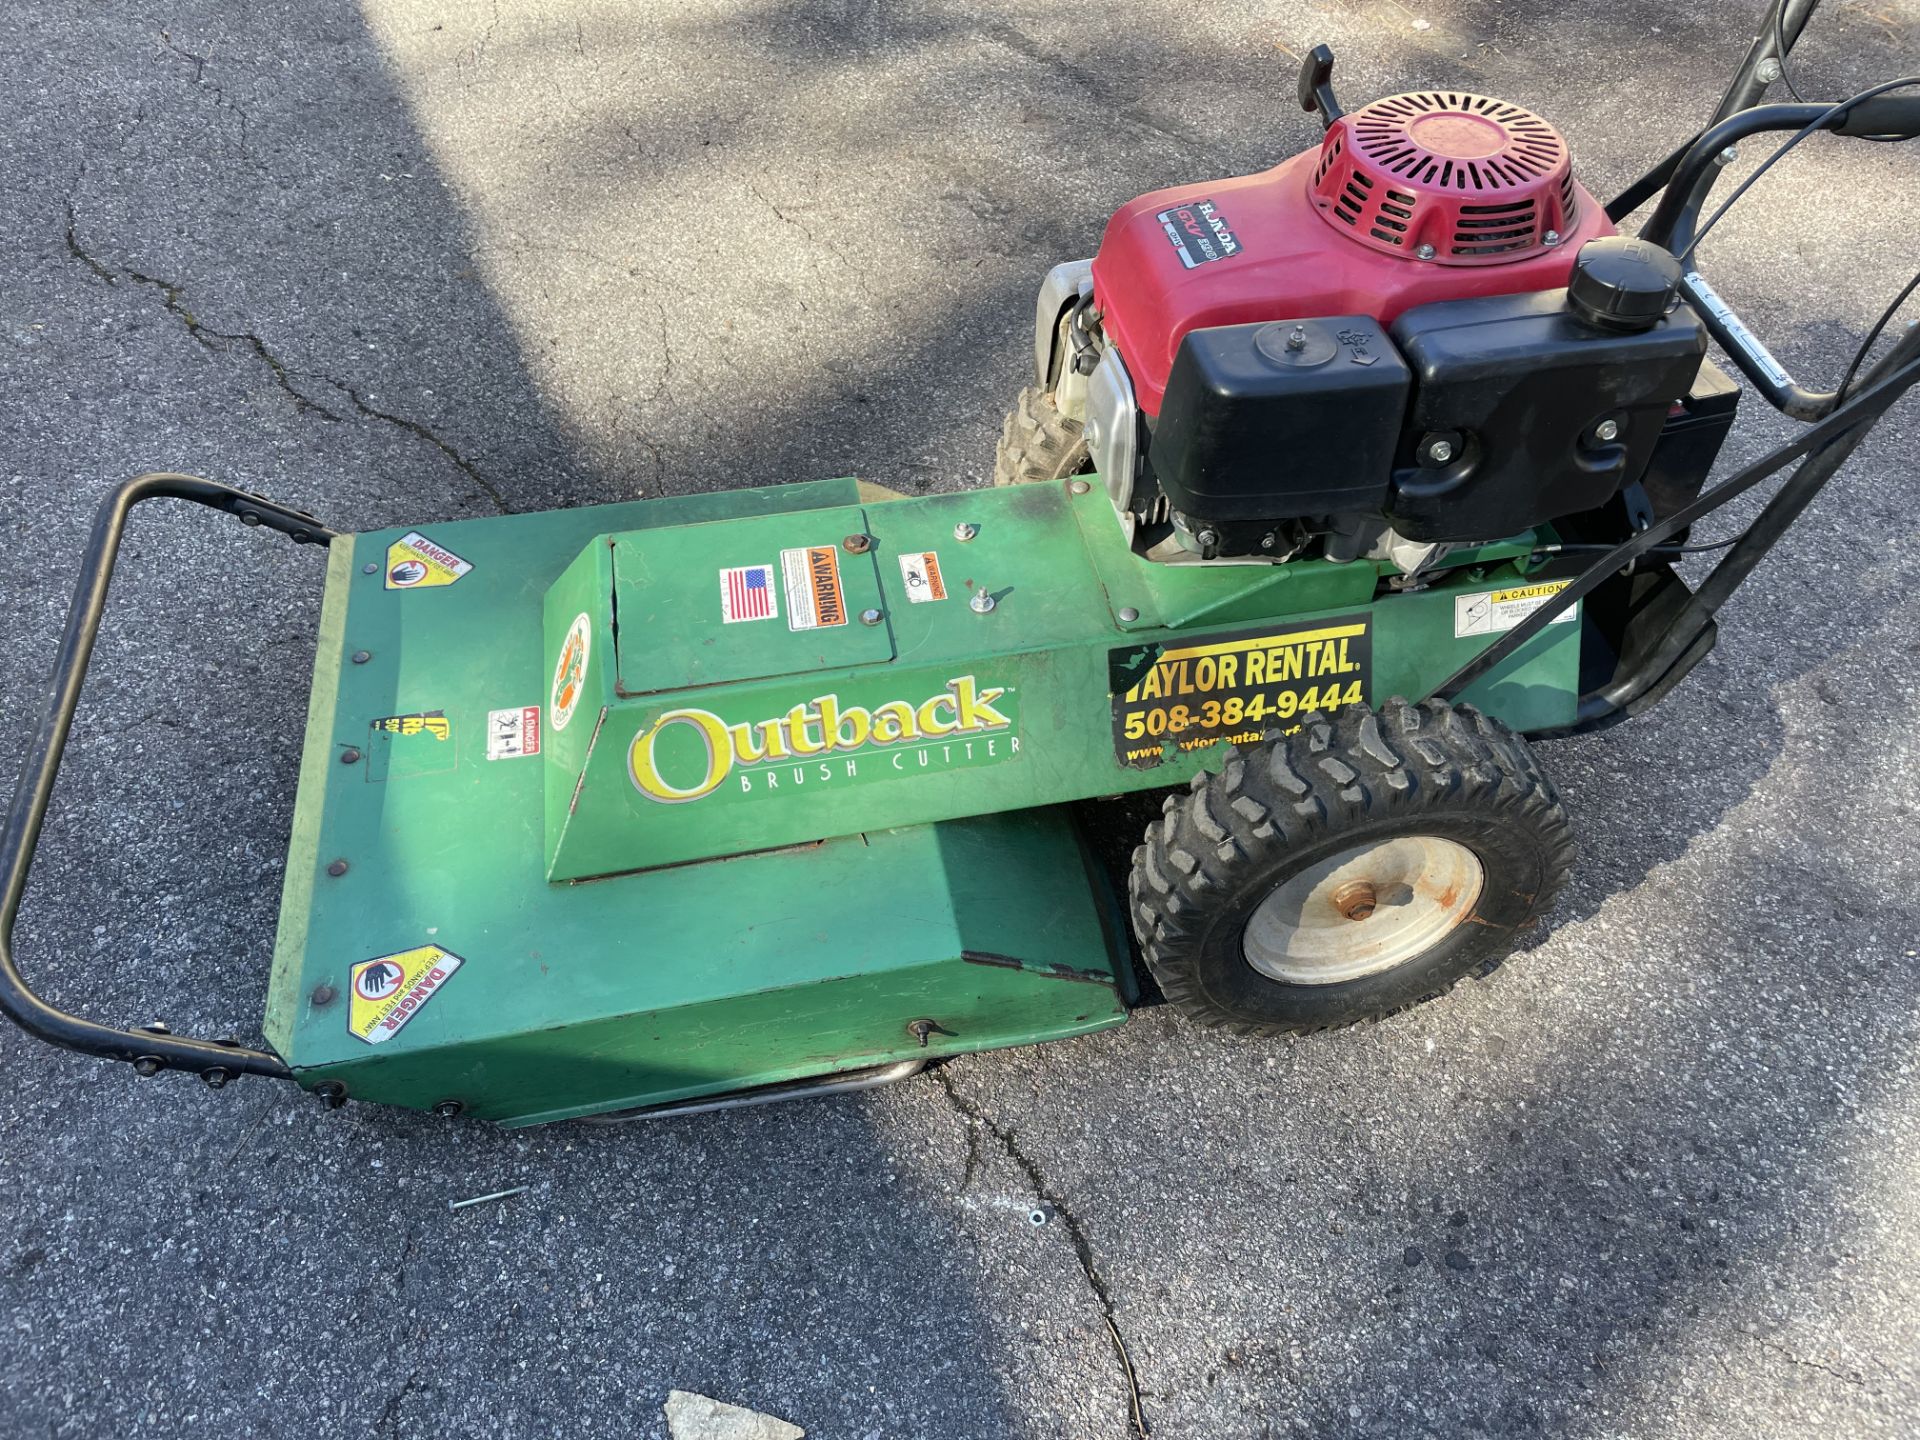 (See Video) Billy Goat Outback Brush Cutter #BC2403HEB #060313067, Honda GXV390 Engine - Image 2 of 9